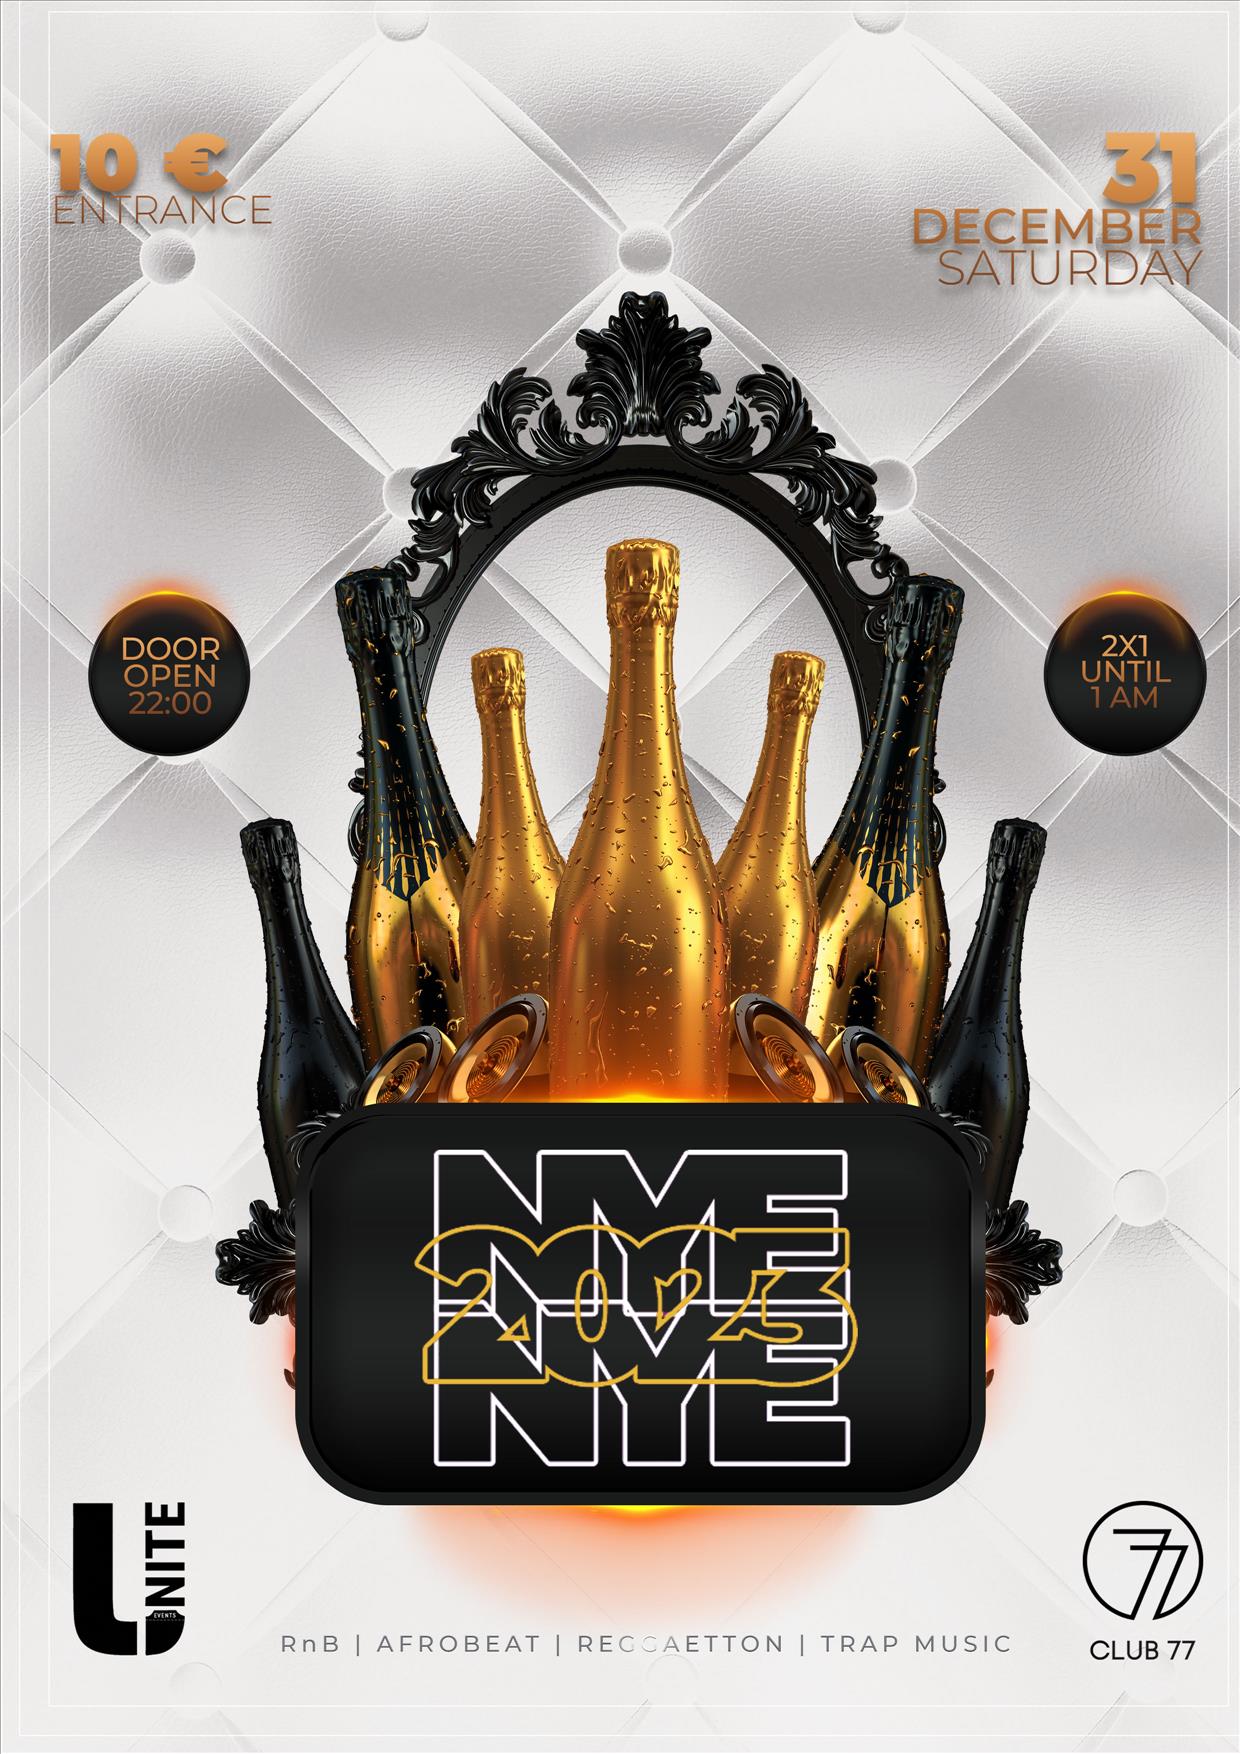 New Years Eve at Club 77 poster